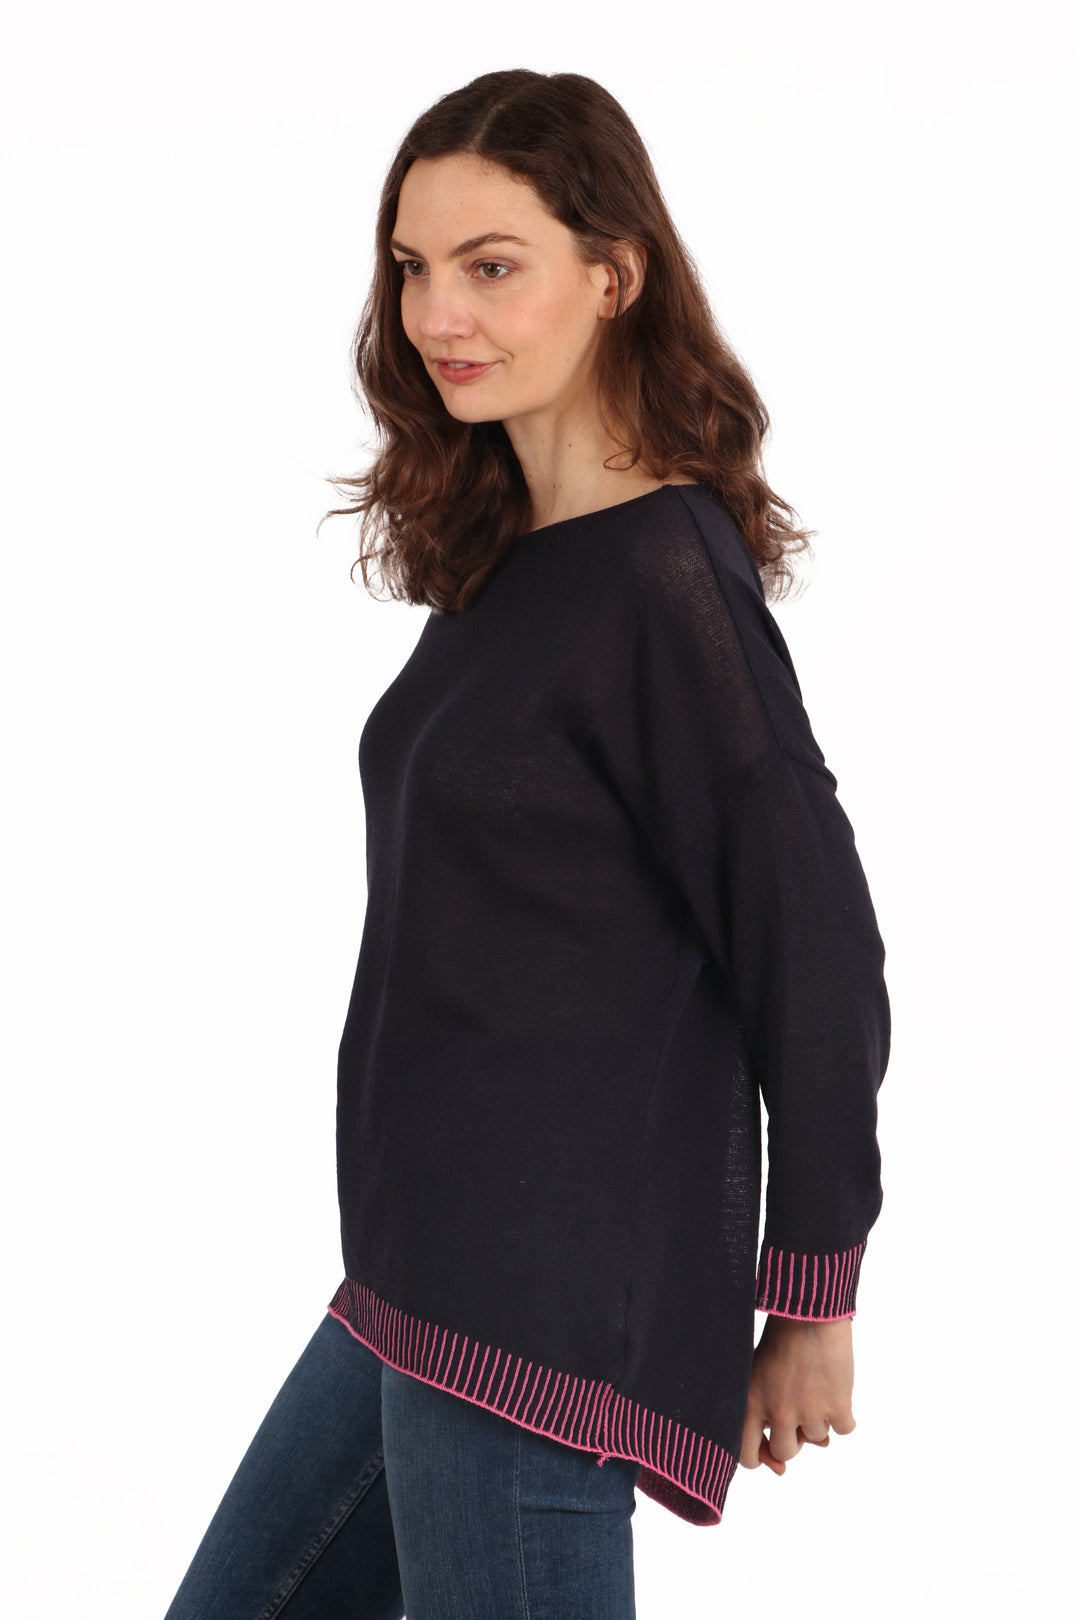 model showing the dip hem feature of this jumper, the item is longer at the back than at the front